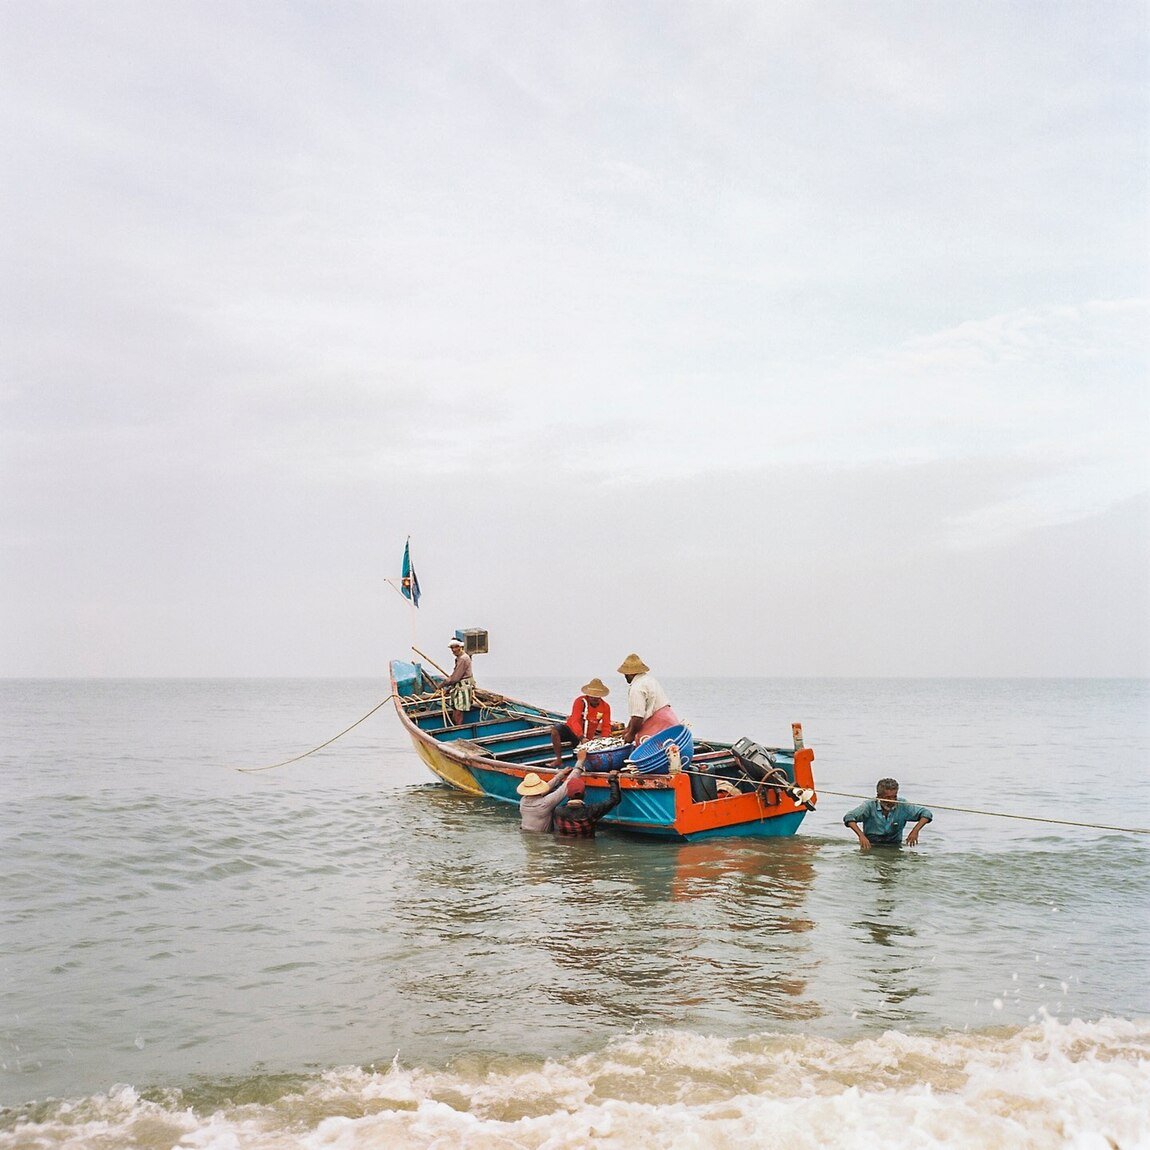 A commercial fishing boat arrives back in the Alleppey harbor. The fisherman sell their catch (likely shrimp, sardines, or mackerel) right off the boat.